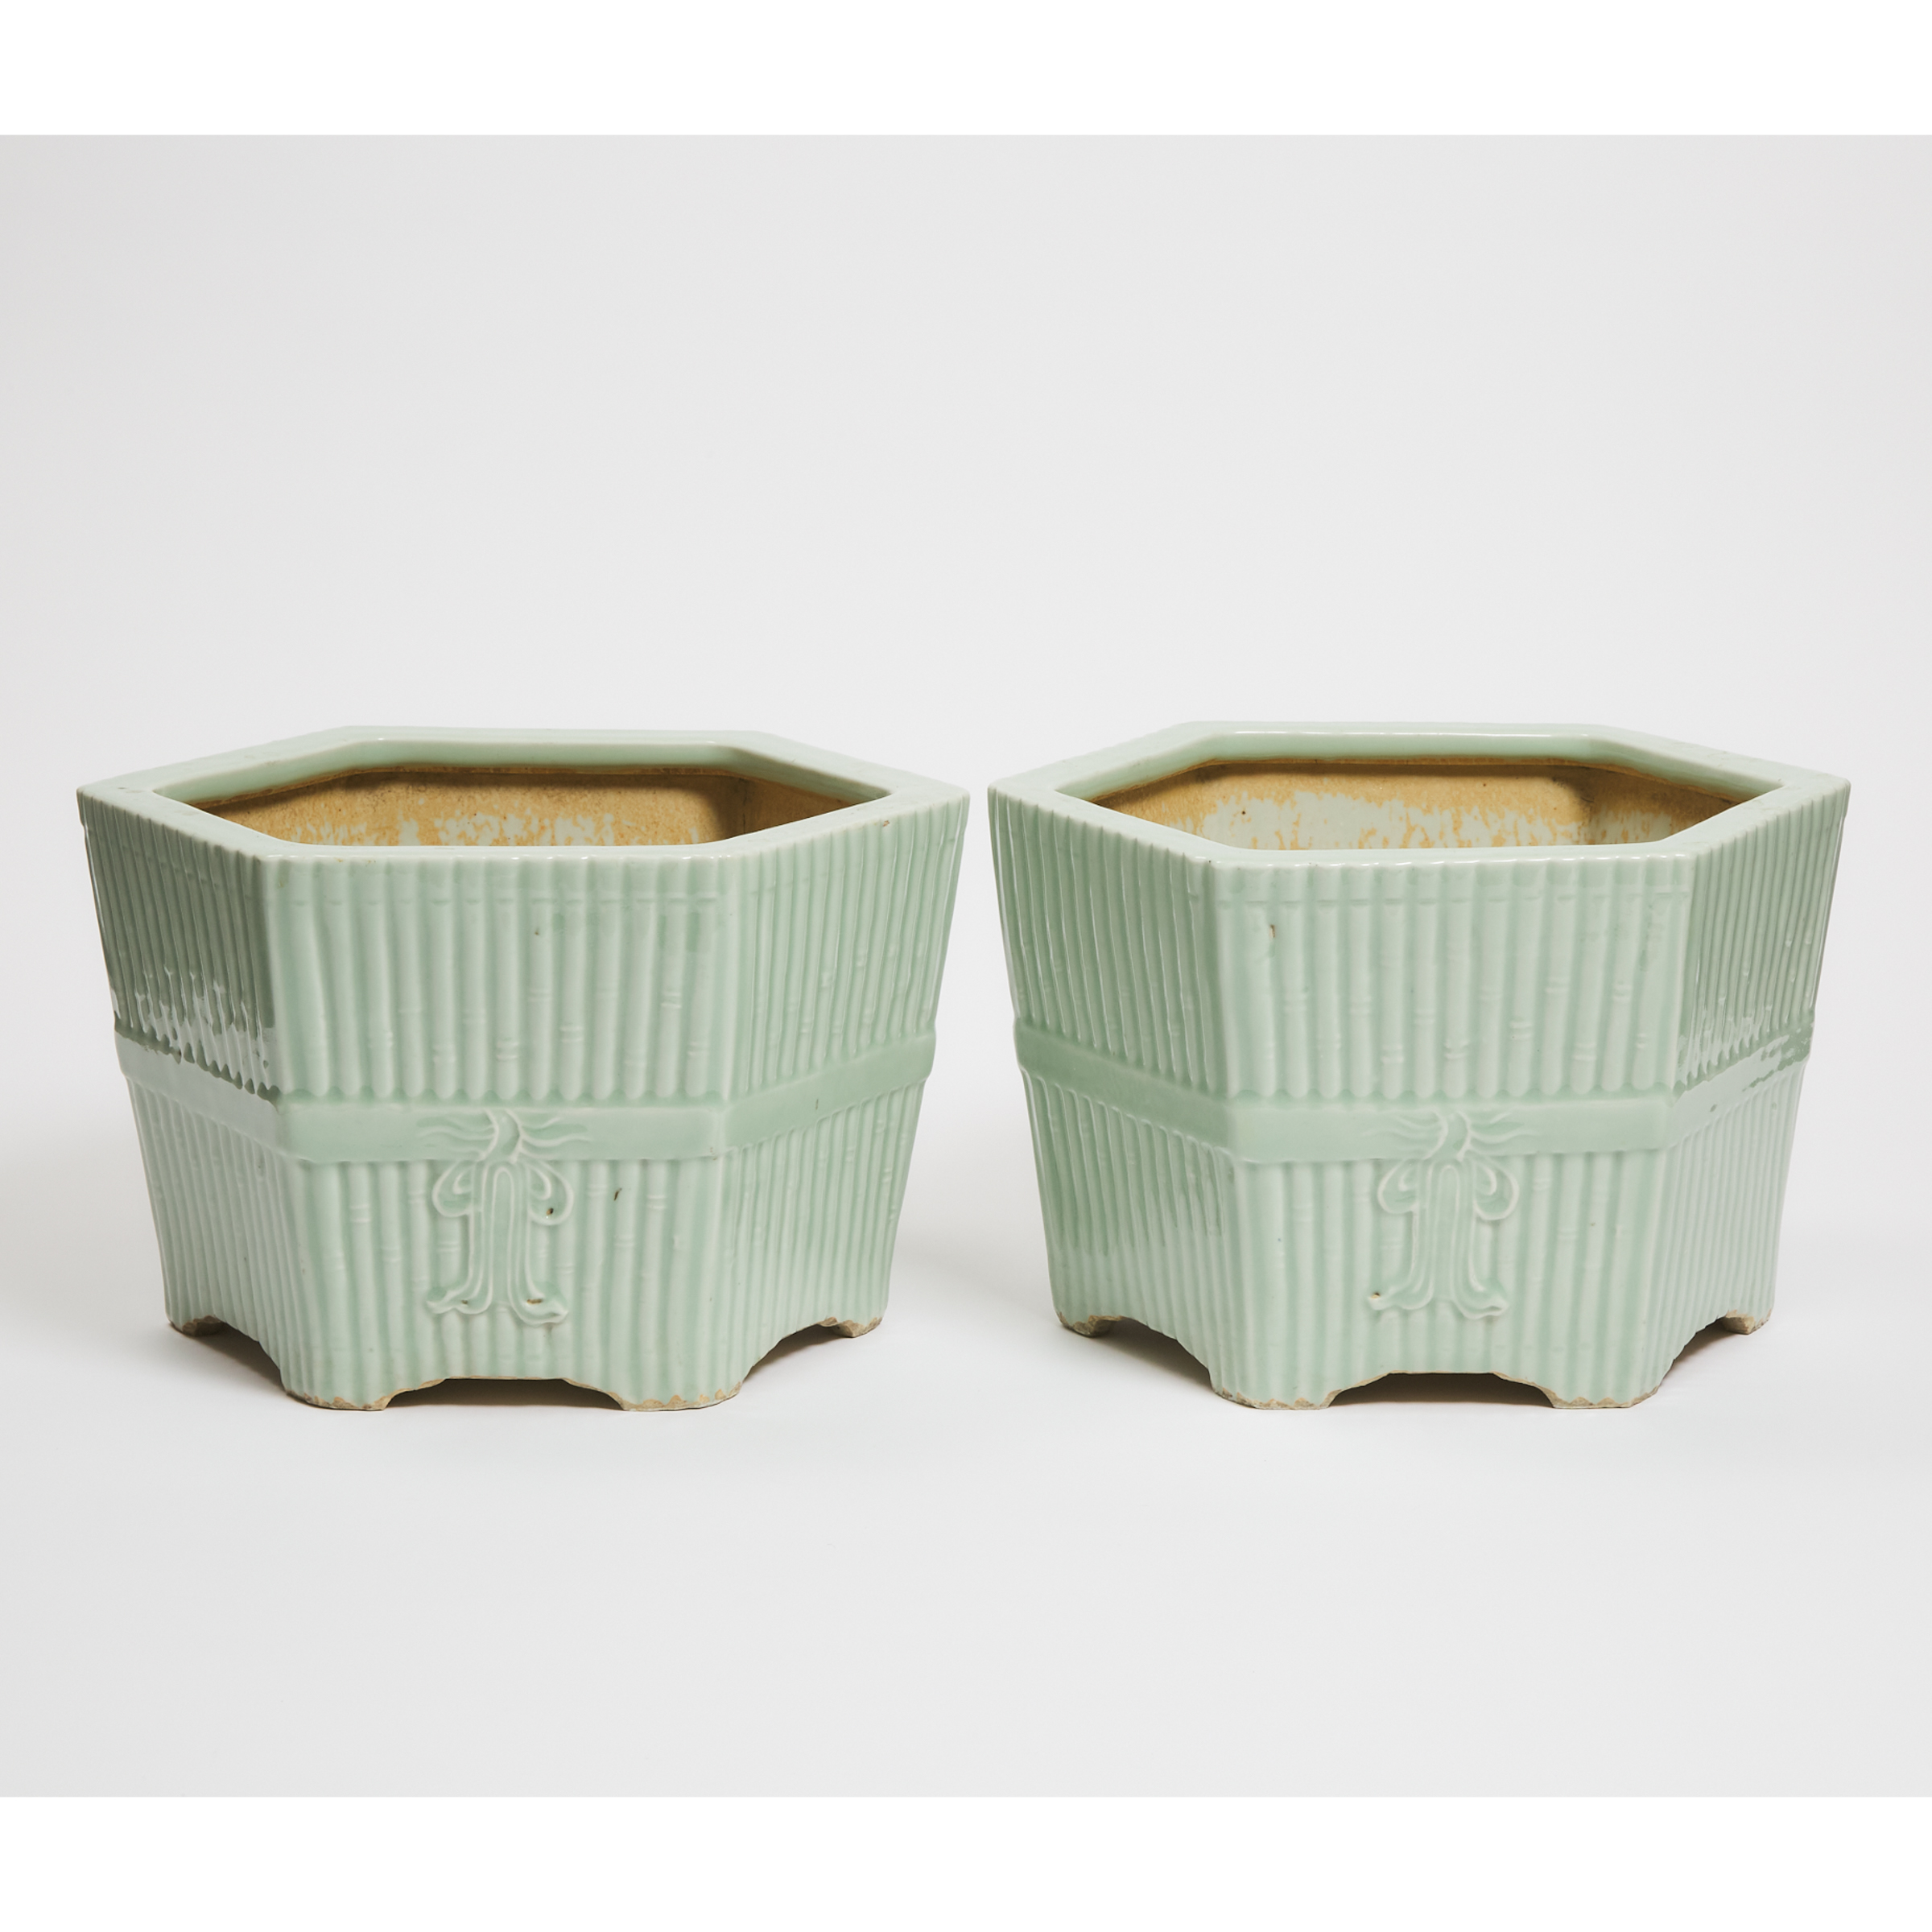 A Pair of Chinese Celadon-Glazed